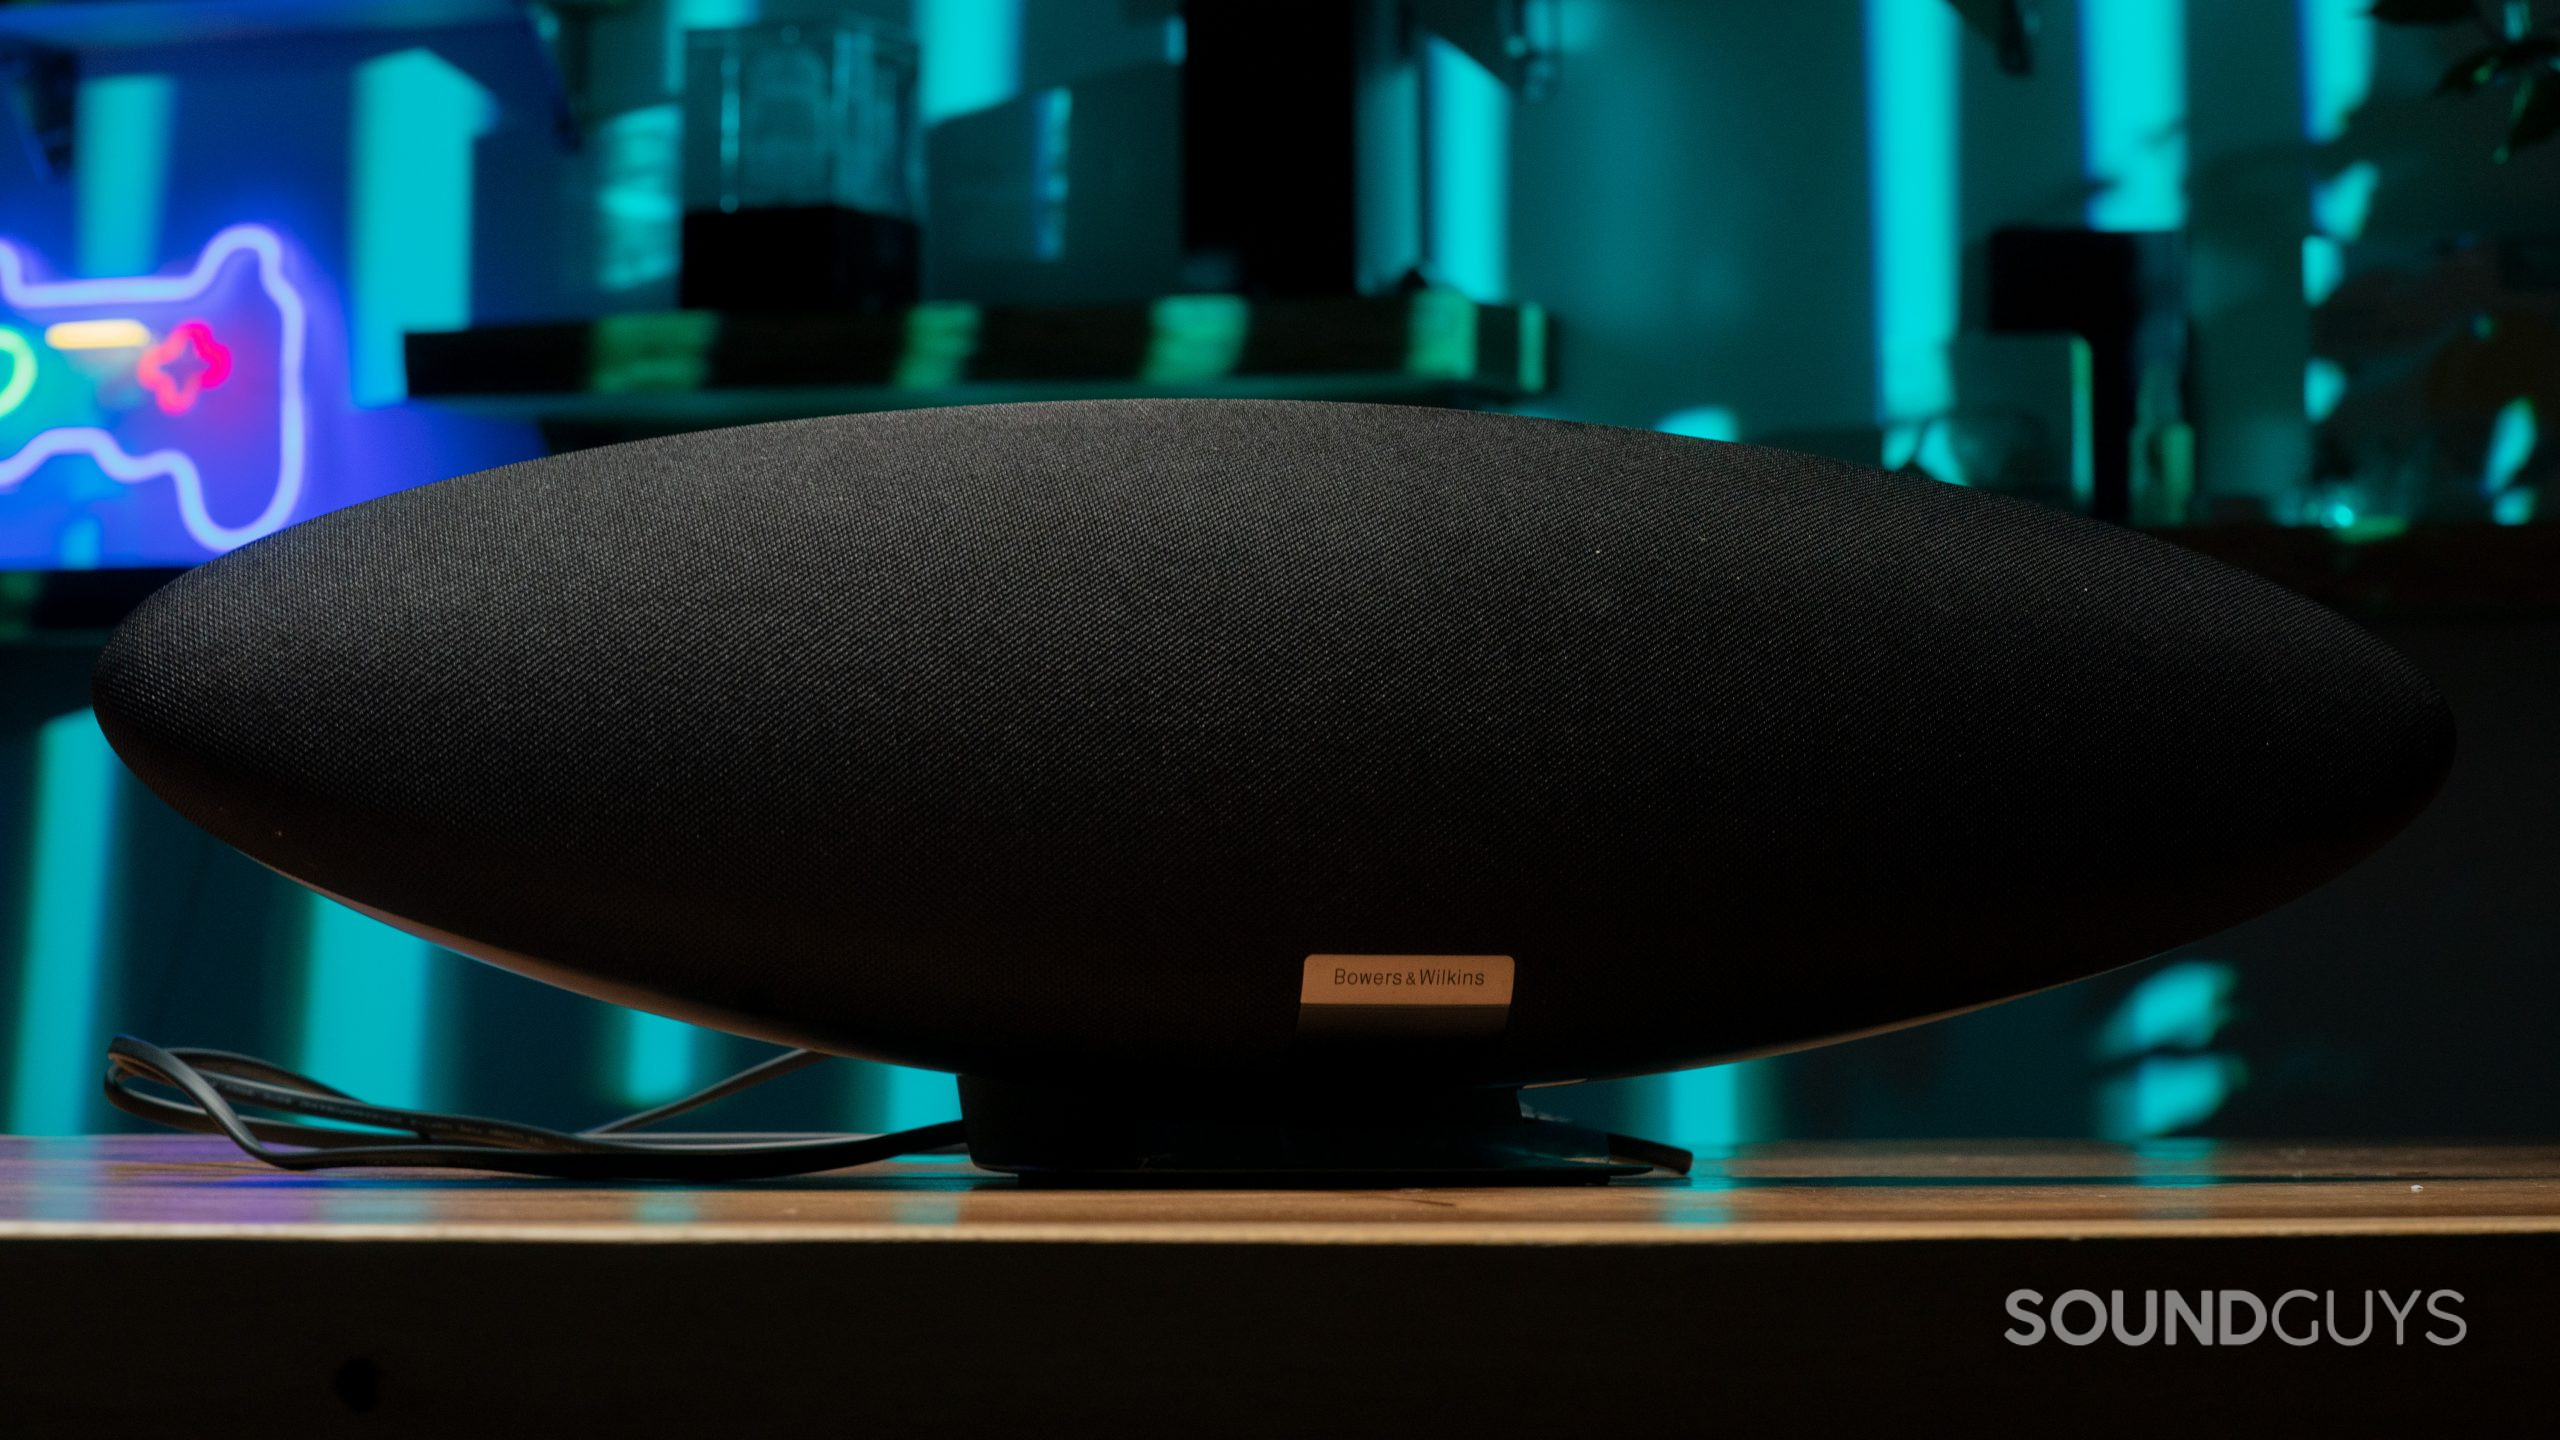 A black Bowers &amp; Wilkins Zeppelin shown resting on a table in front of an abstract background of light blue and black shapes.